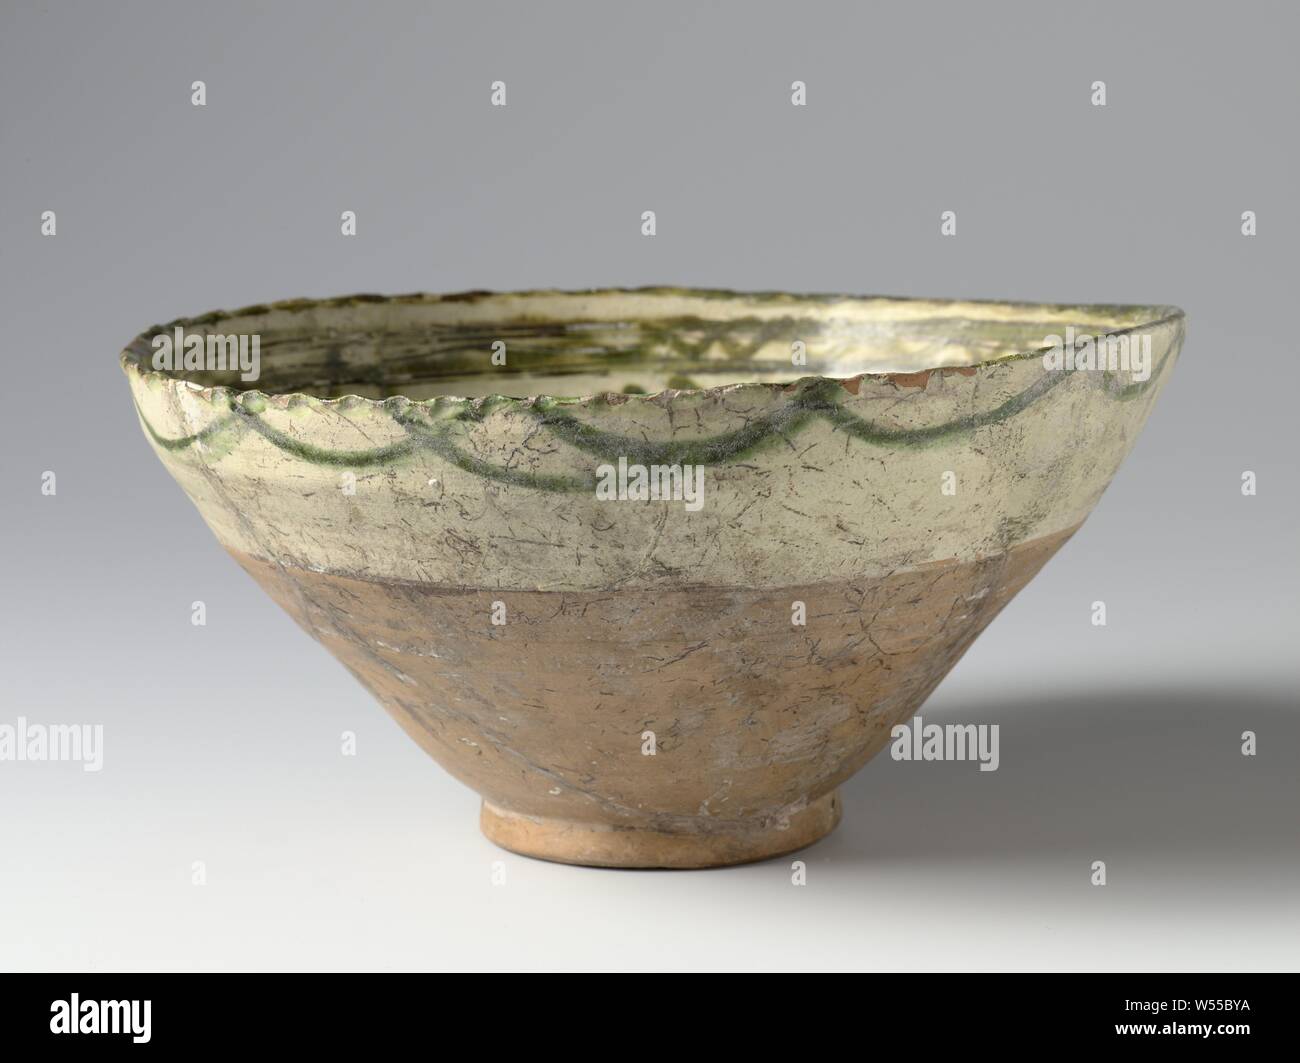 Bowl with ornamental borders, Bowl of earthenware decorated in sgraffito (incised) lines and green lead glaze with two decorative bands on the inside wall and a wavy line on the outside., anonymous, Amol, c. 1000 - c. 1199, earthenware, glaze, vitrification, h 10.6 cm d 20.8 cm d 7.3 cm Stock Photo